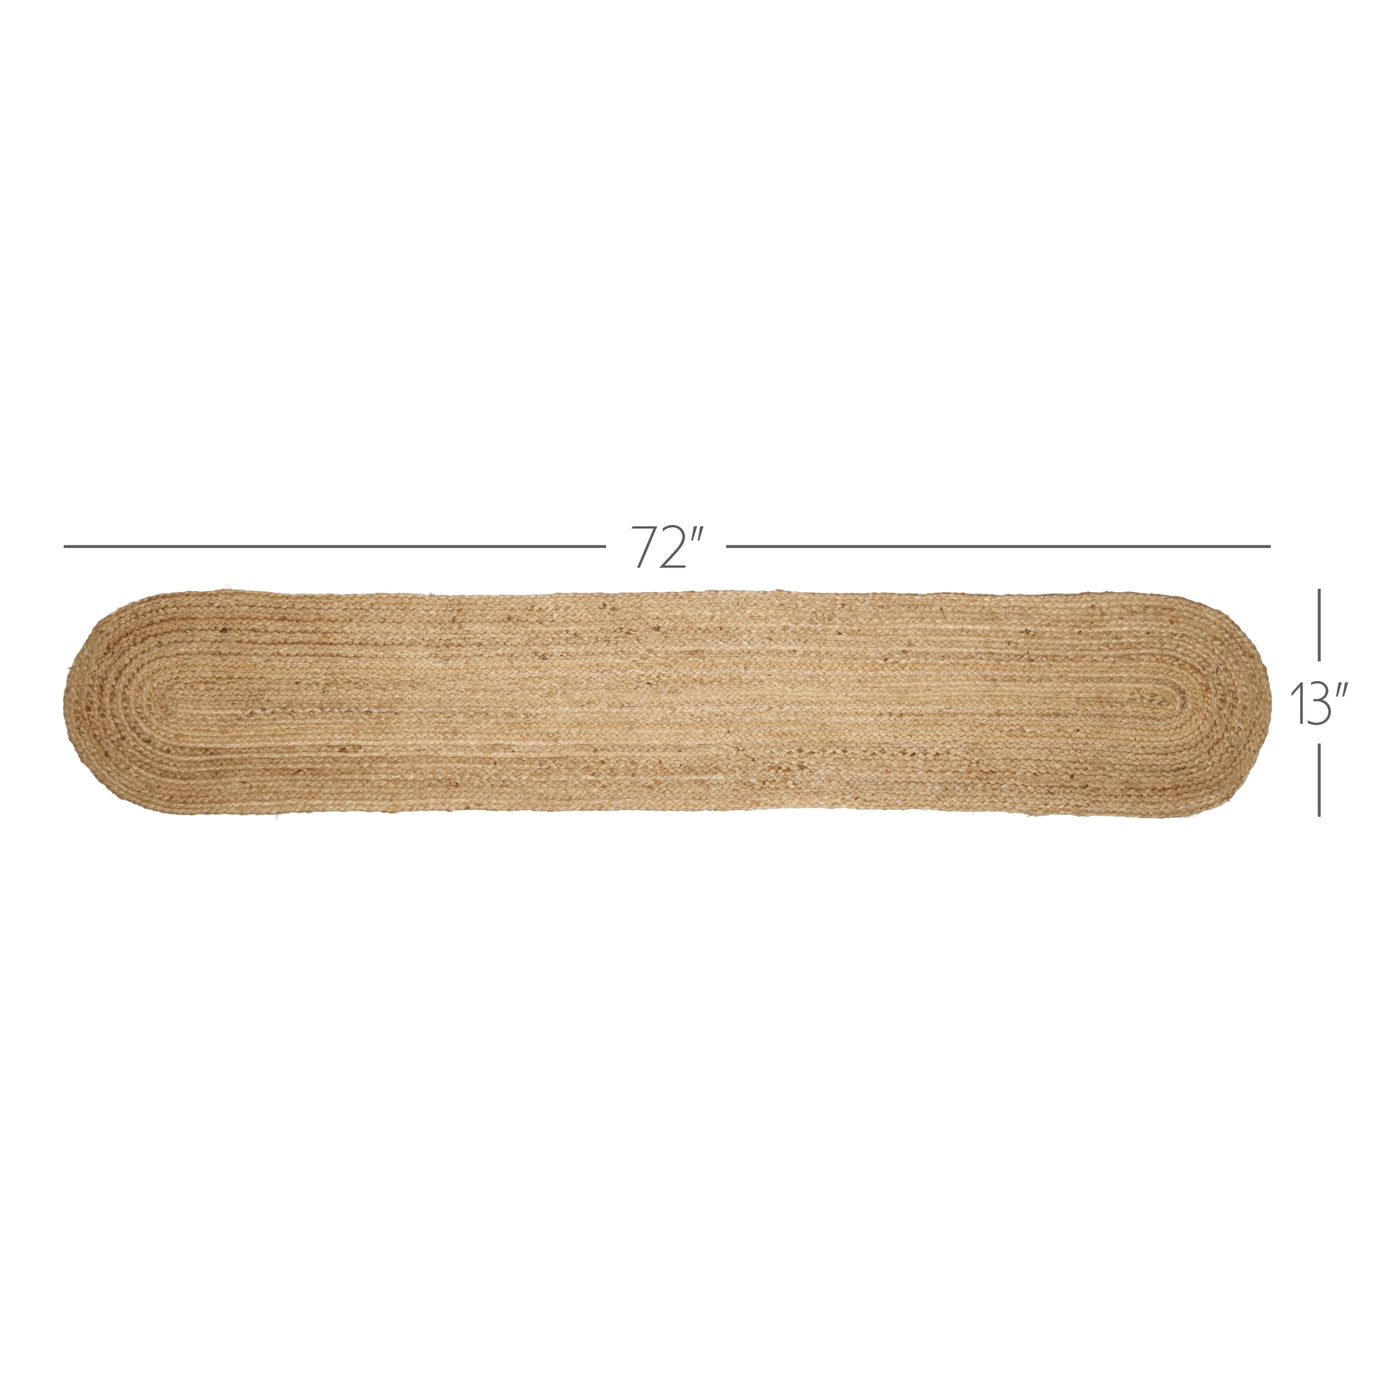 Natural Jute Rounded Table Runner 13" x 72"